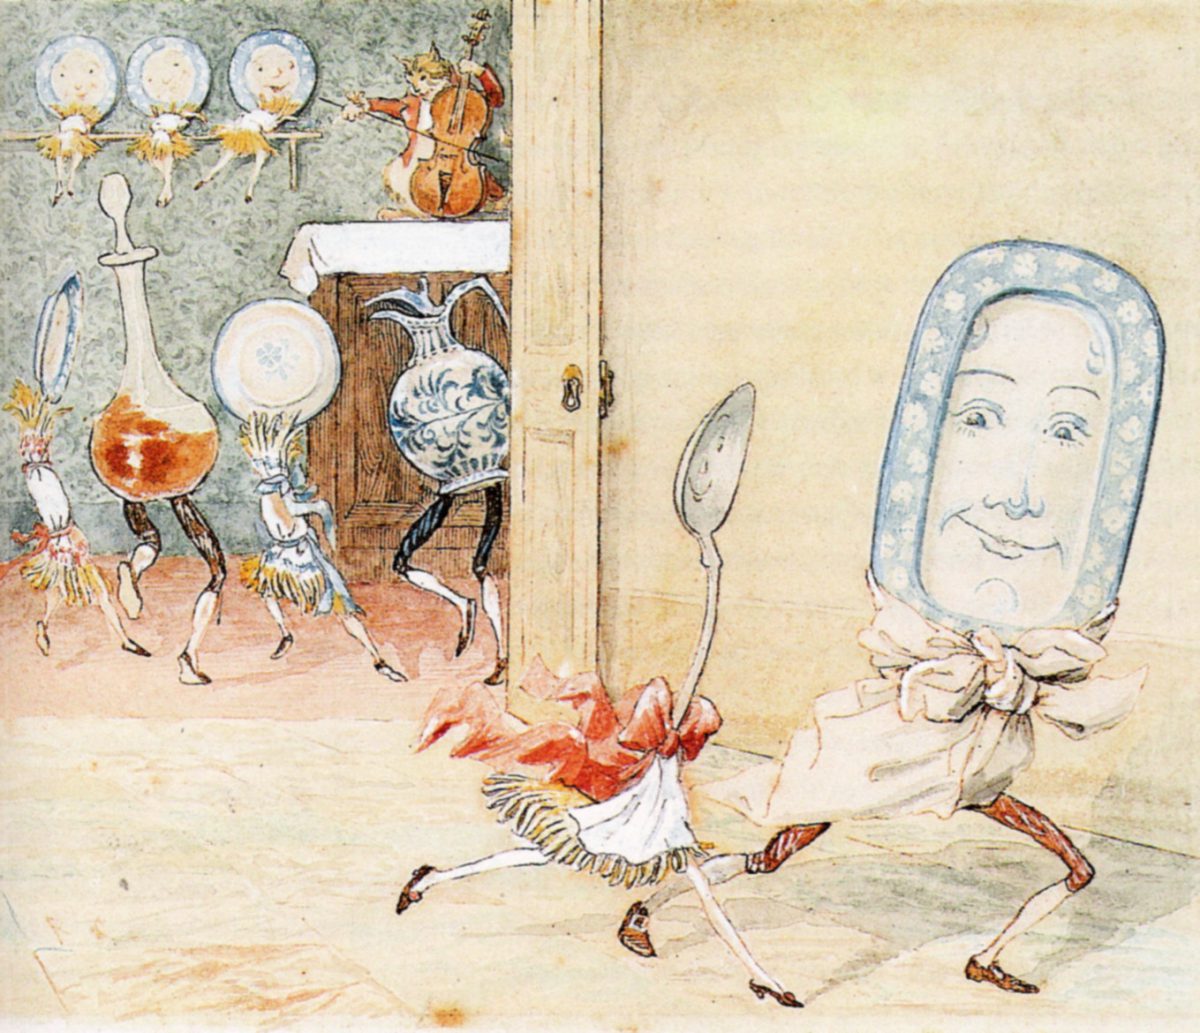 Illustration of "the Dish Ran Away with the Spoon"